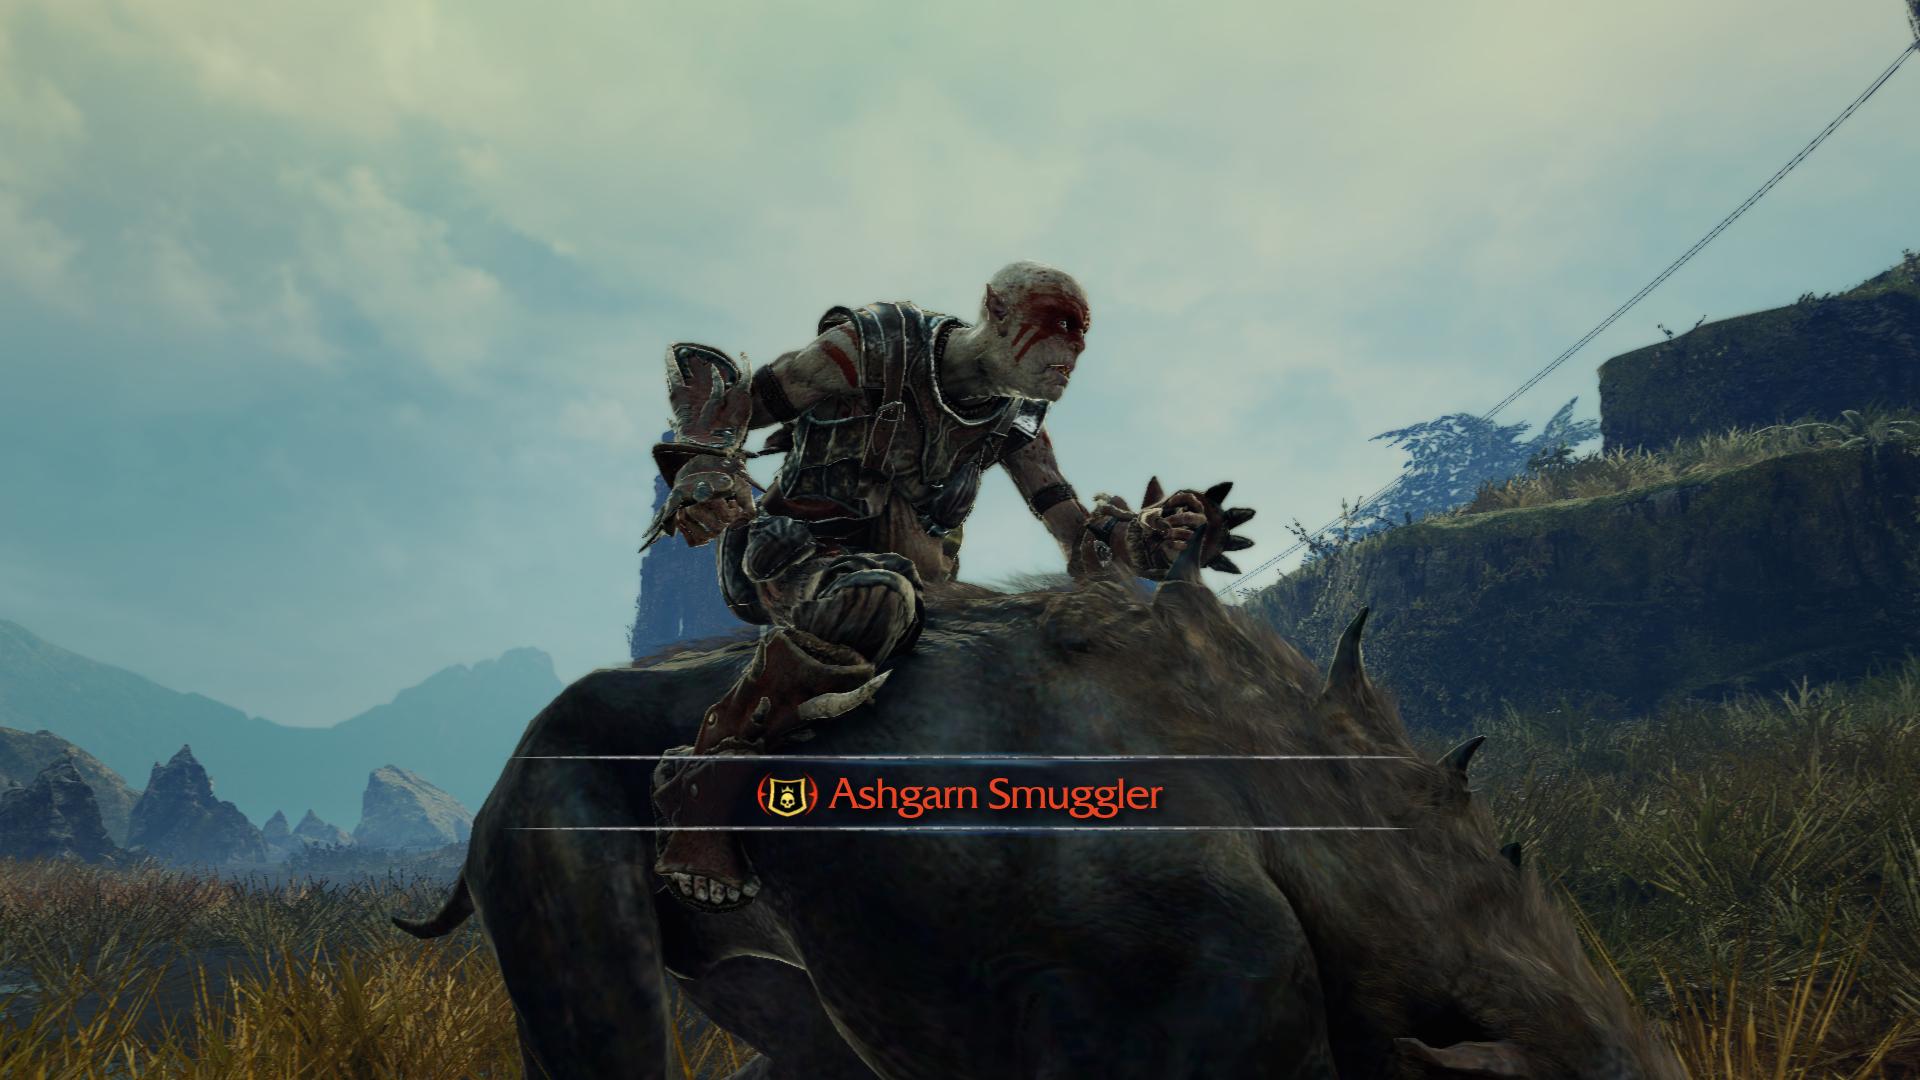 Middle-earth: Shadow of Mordor Lord of the Hunt DLC adds new beasts